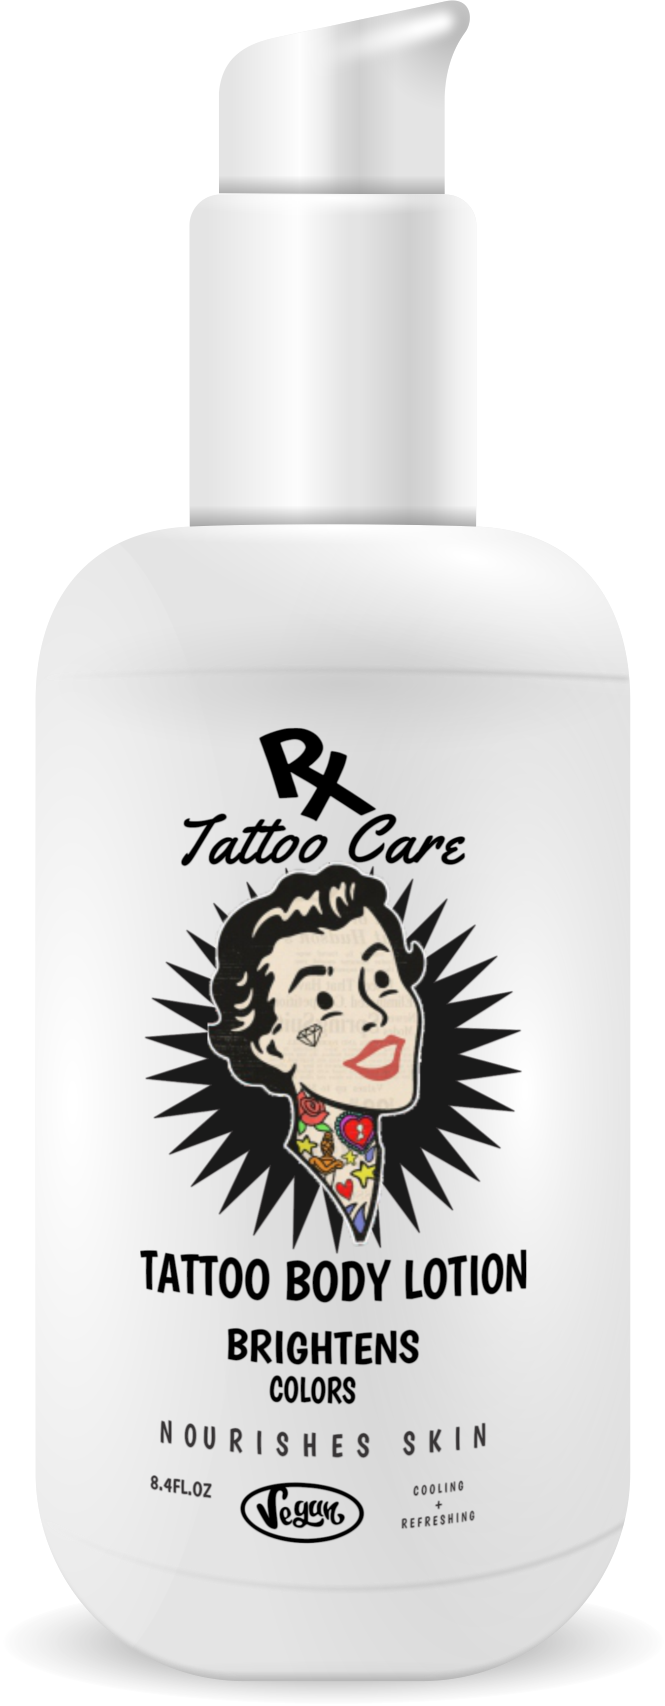 The Best Products For Tattoo Aftercare You Can Shop On Amazon | URBAN LIST  GLOBAL